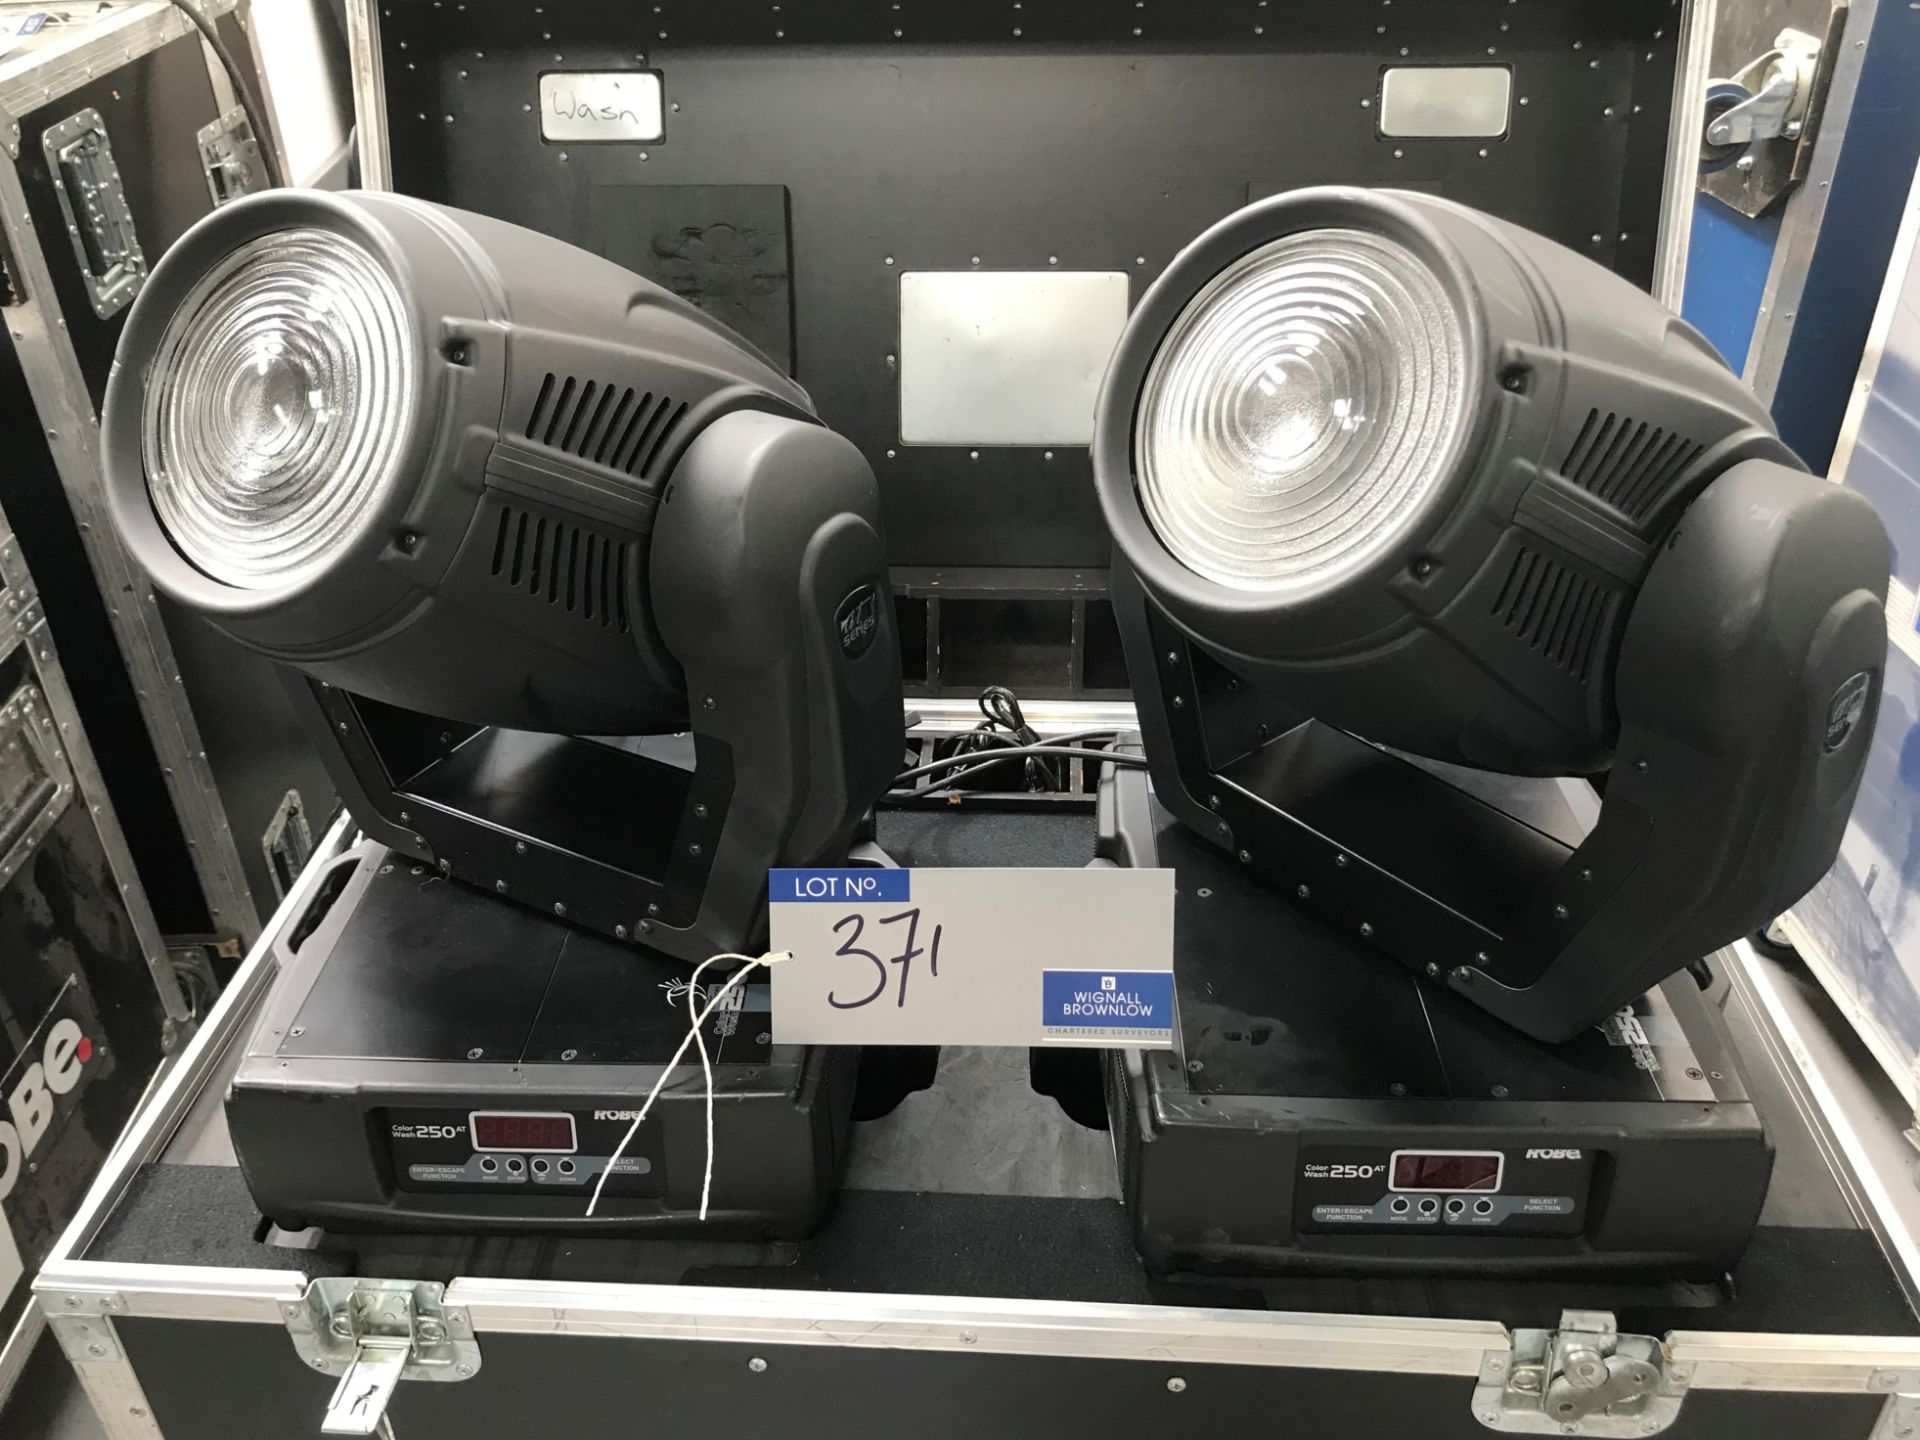 2 Robe AT Series ColorWash 250AT Moving Head Wash Lights (recently serviced) with Clamps and